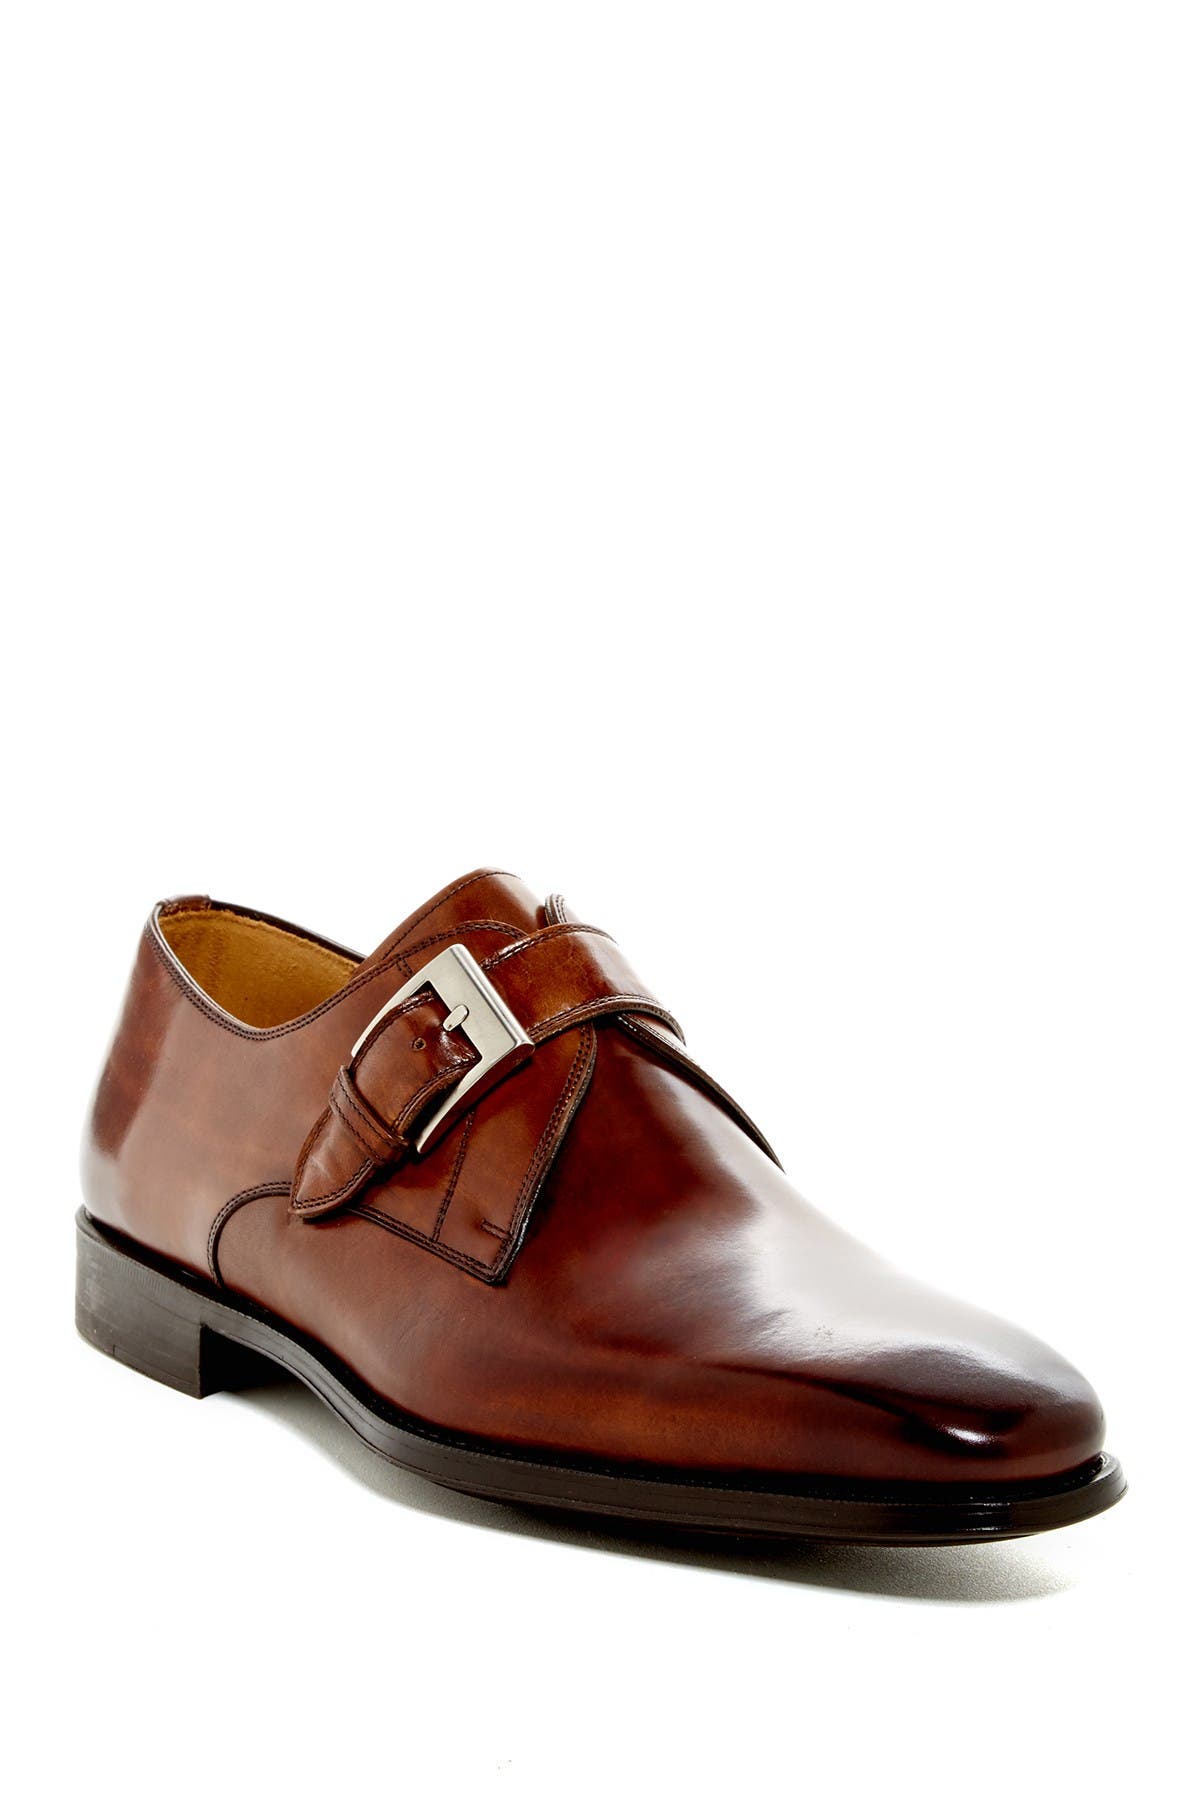 magnanni casual shoes